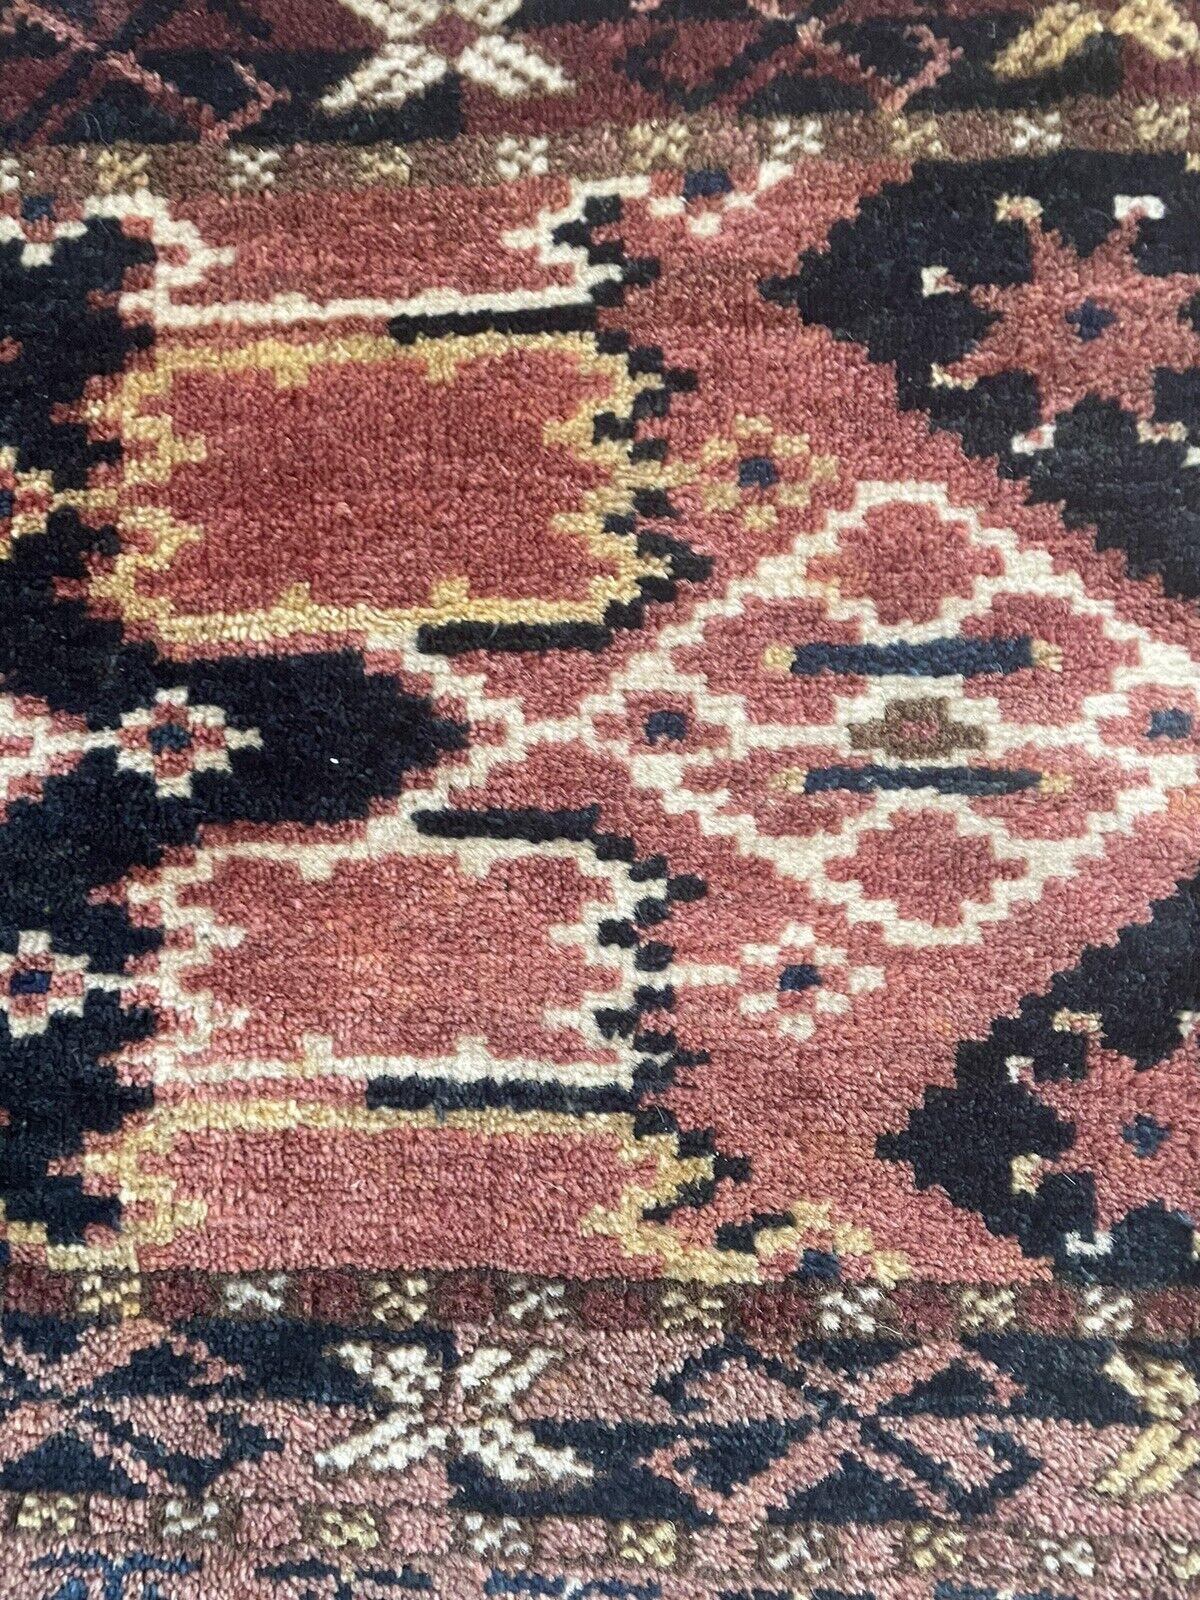 Early 20th Century Handmade Antique Afghan Beshir Collectible Chuval Rug 1.5' x 4.8', 1900s - 1N11 For Sale